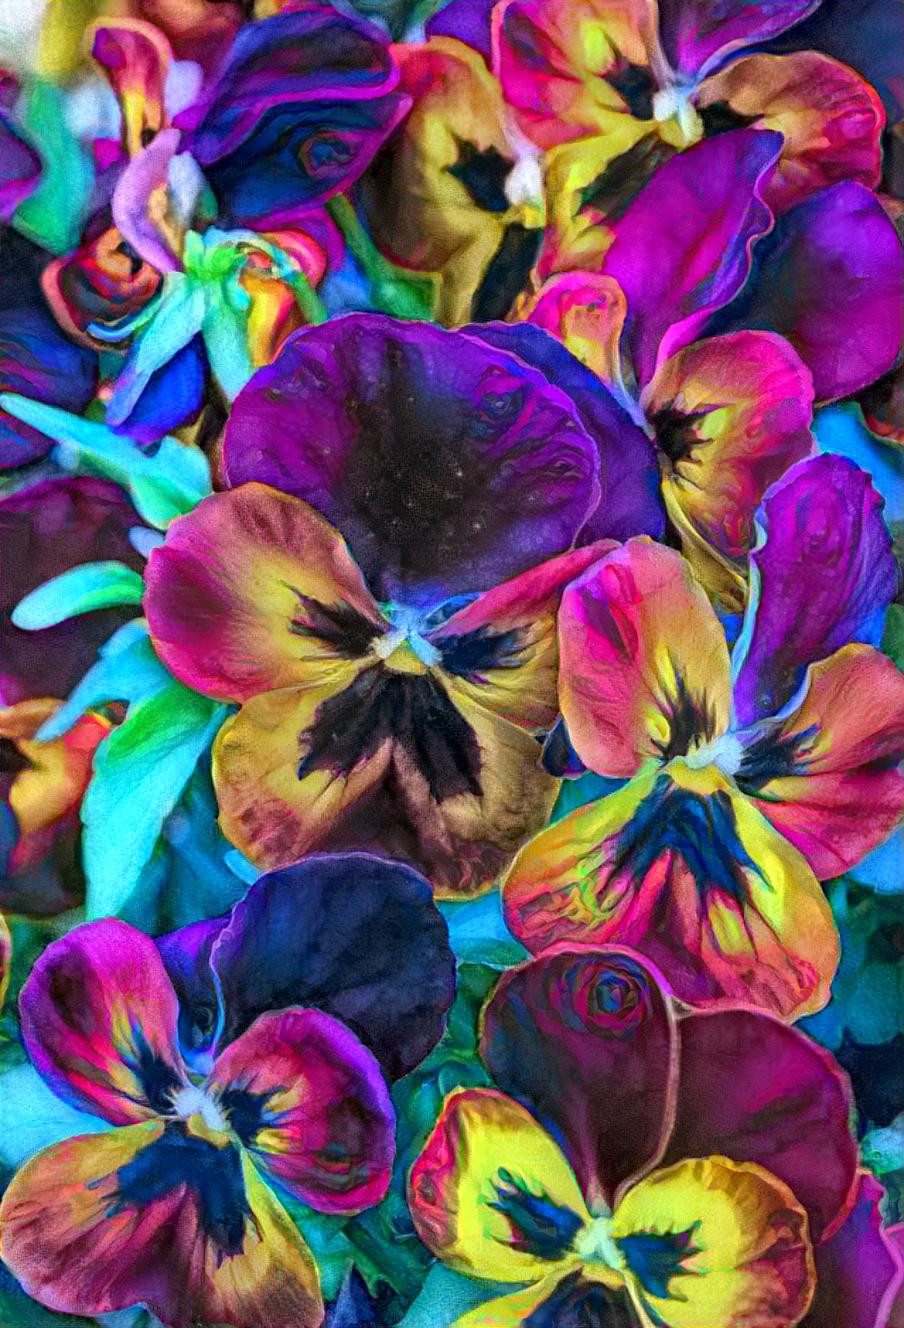 Fanciful pansies